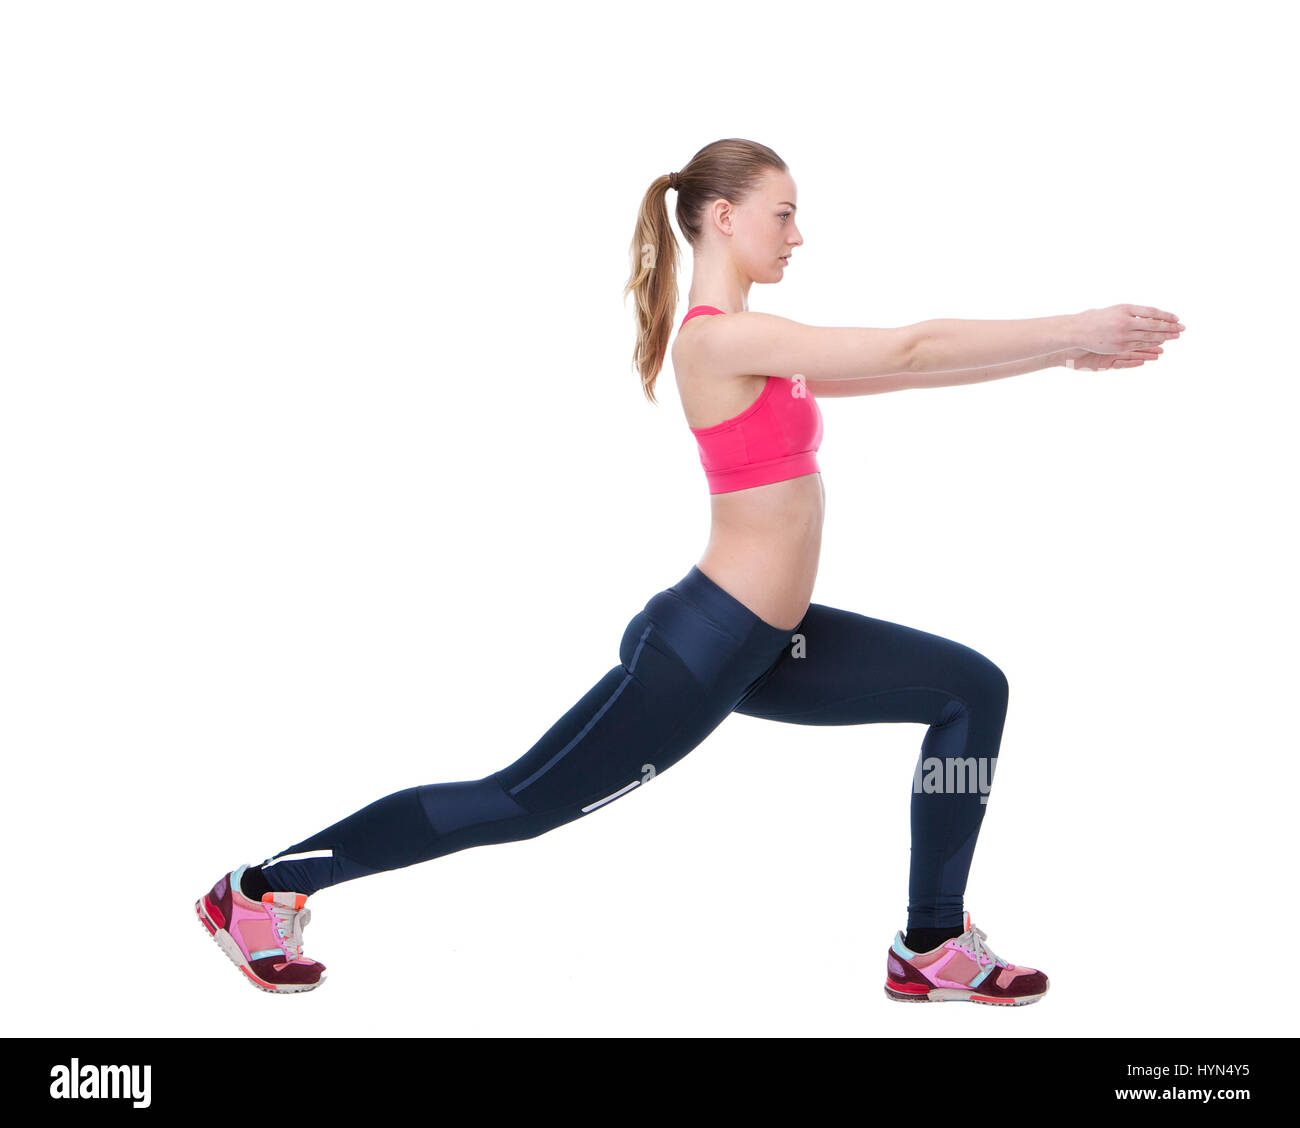 Raised leg stretch athlete Cut Out Stock Images & Pictures - Alamy